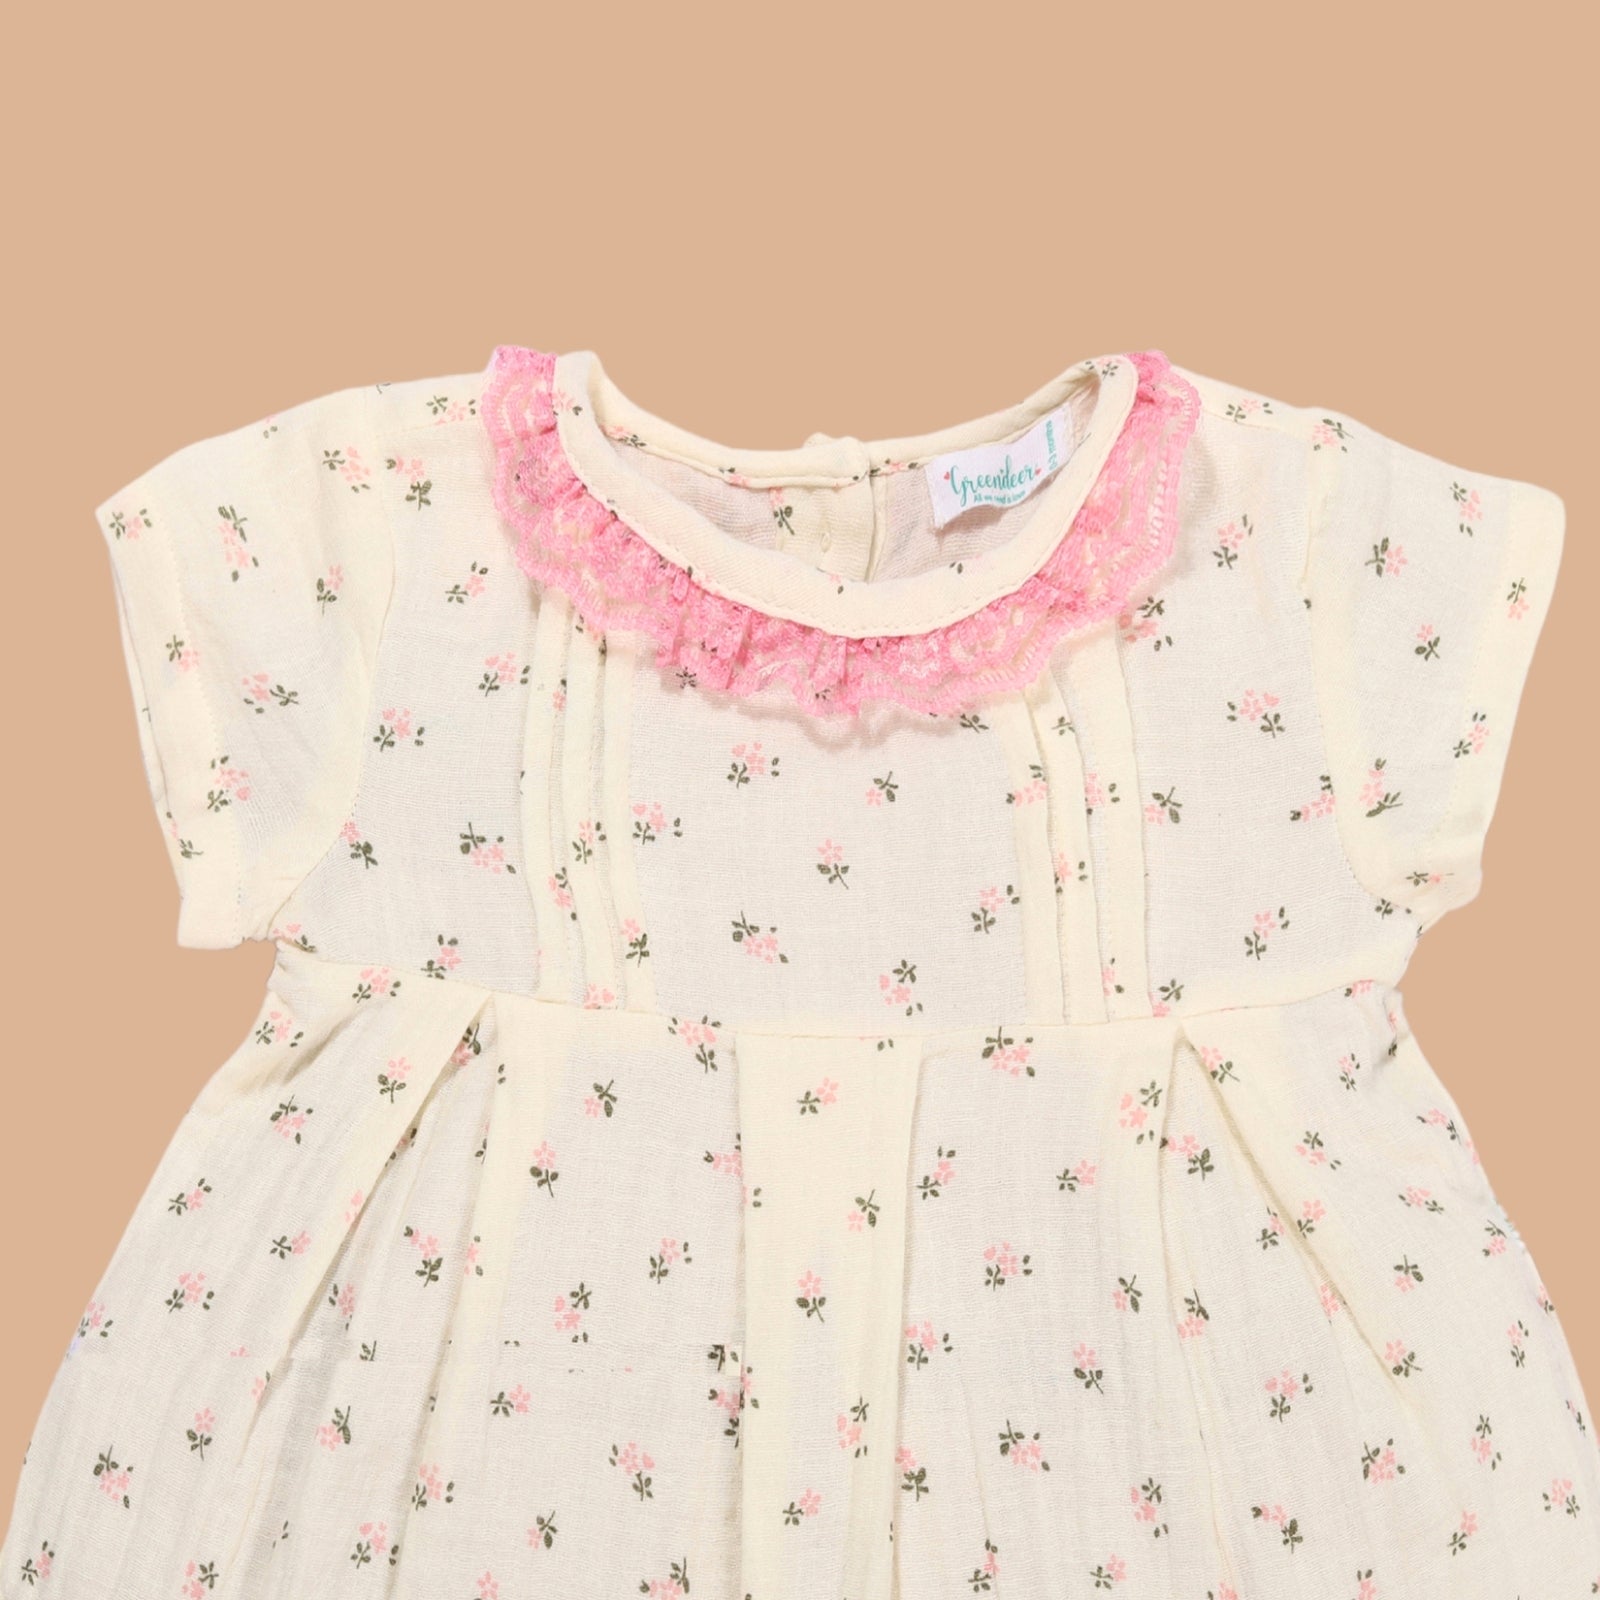 Greendeer Floral Pleated Cotton Frock with Bloomer